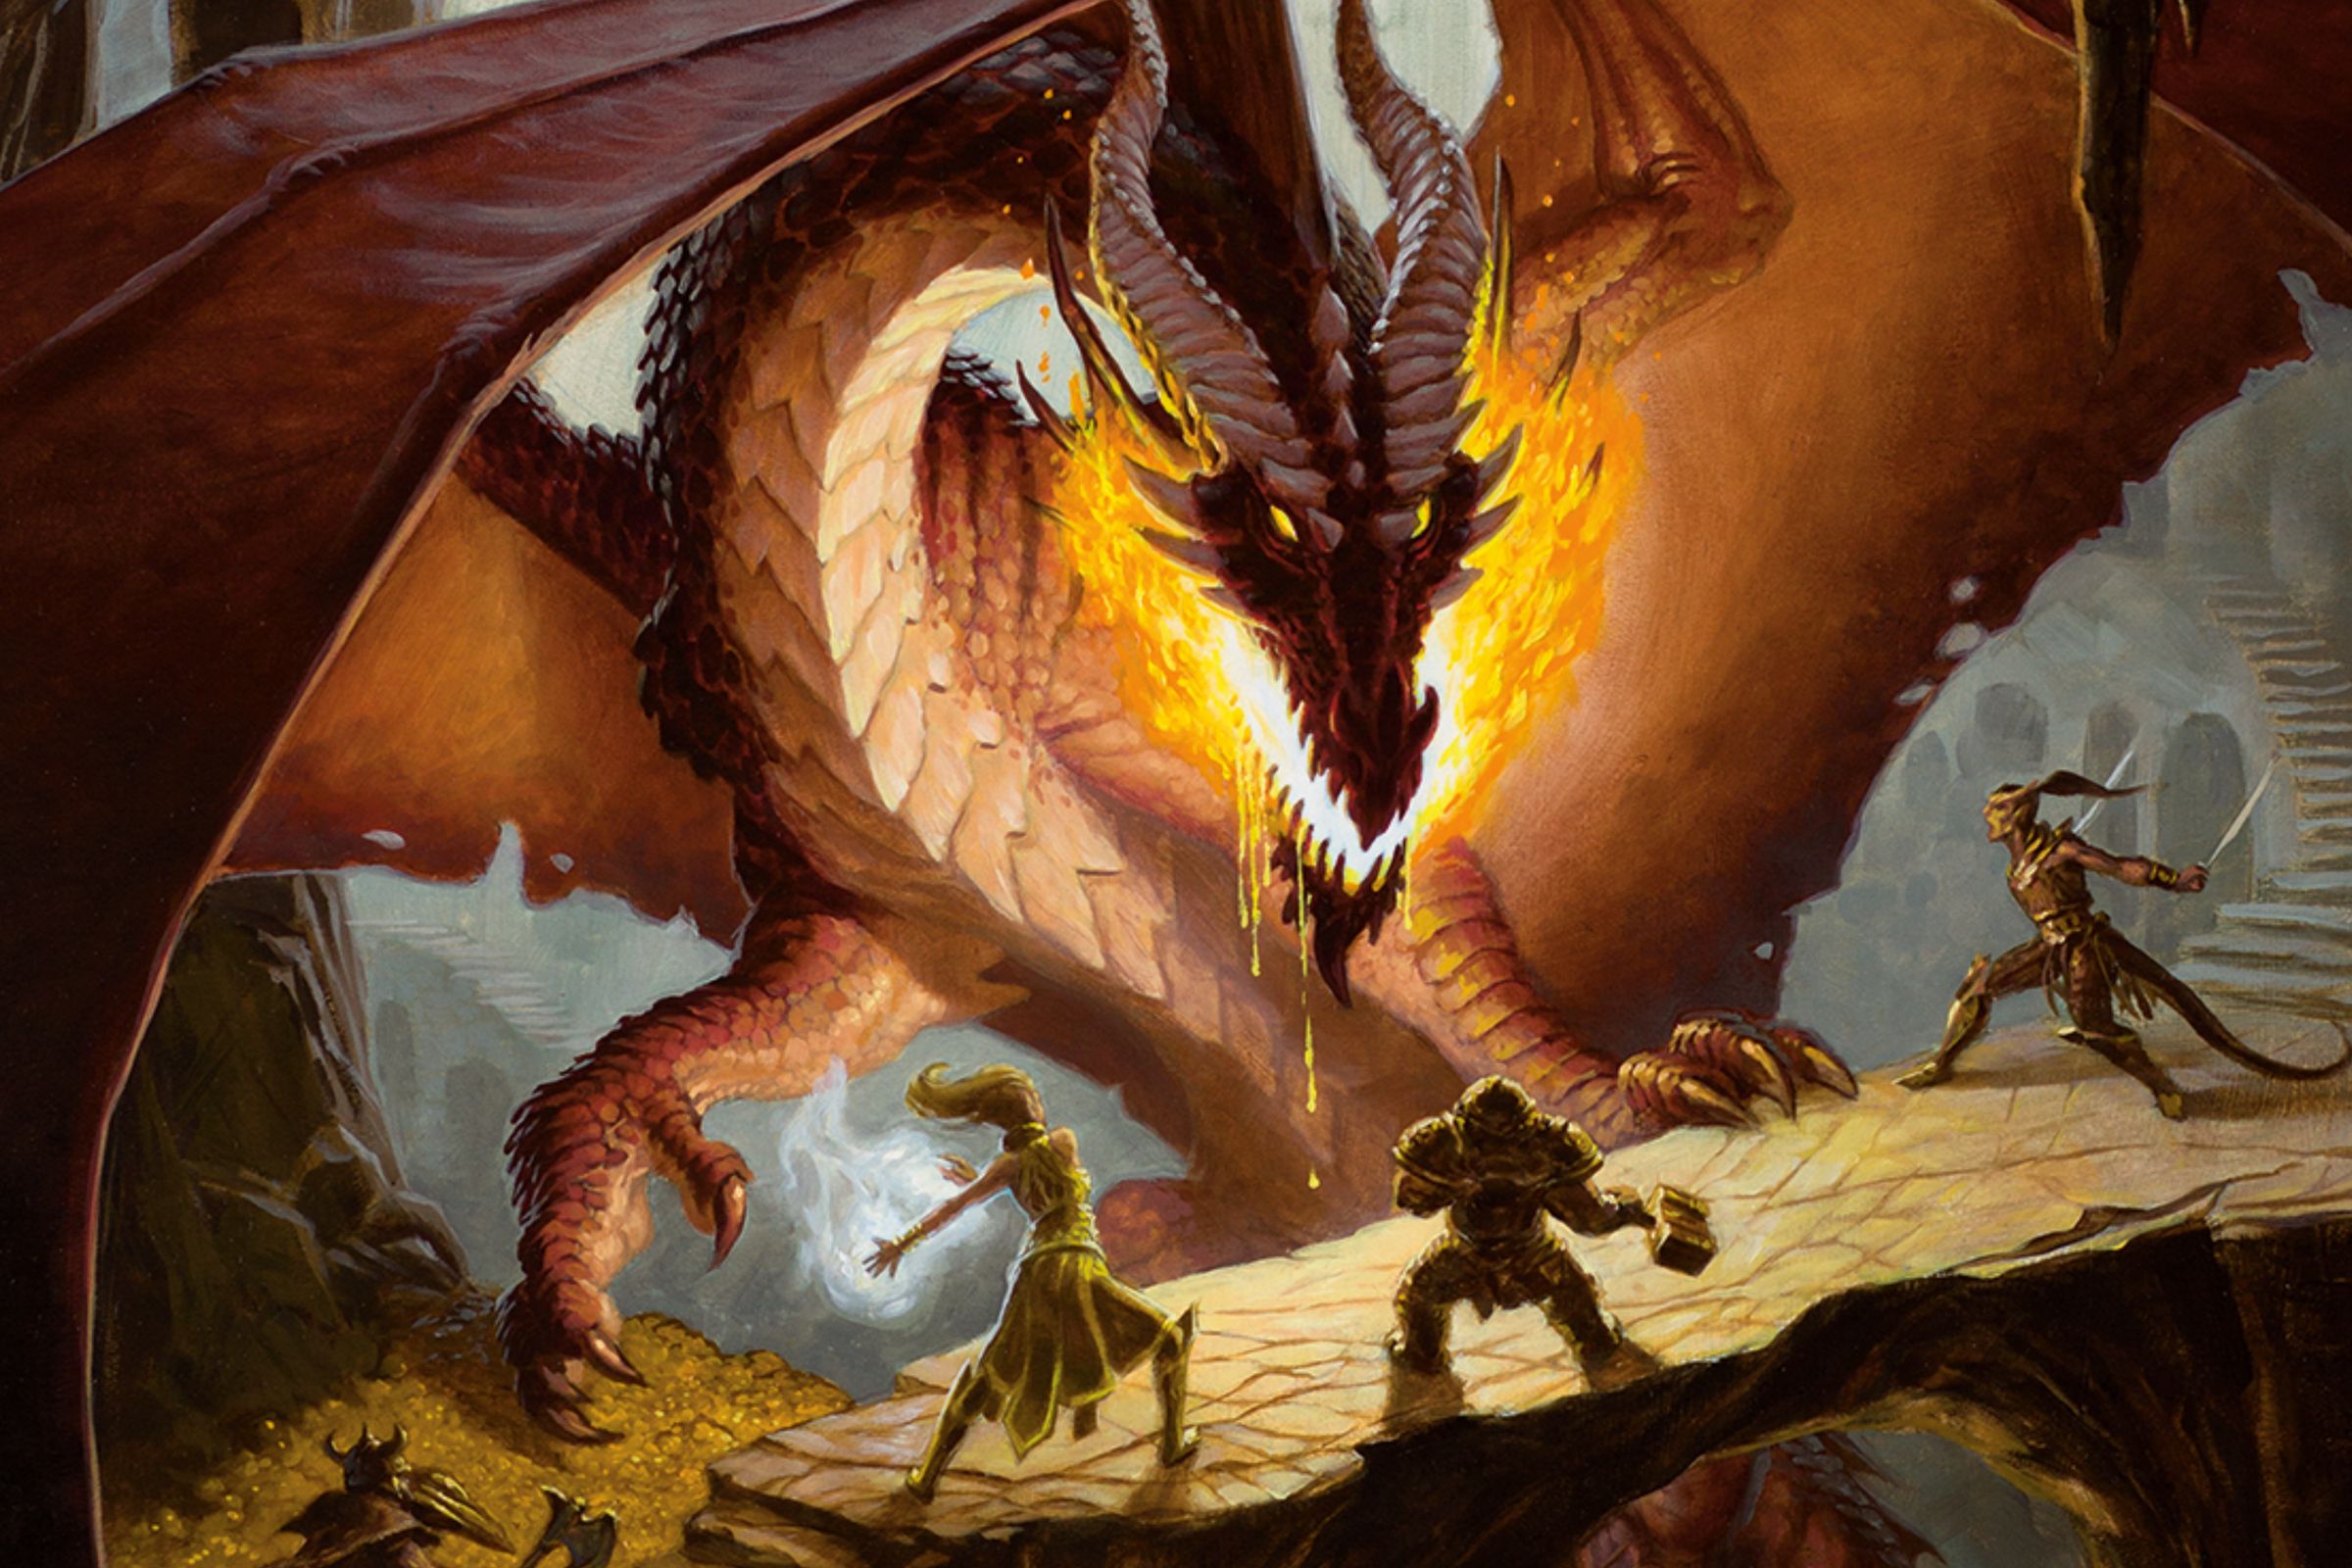 Official art from the Dungeons & Dragons tabletop roleplaying game depicting a party of adventurers fighting a large red dragon in a dungeon.